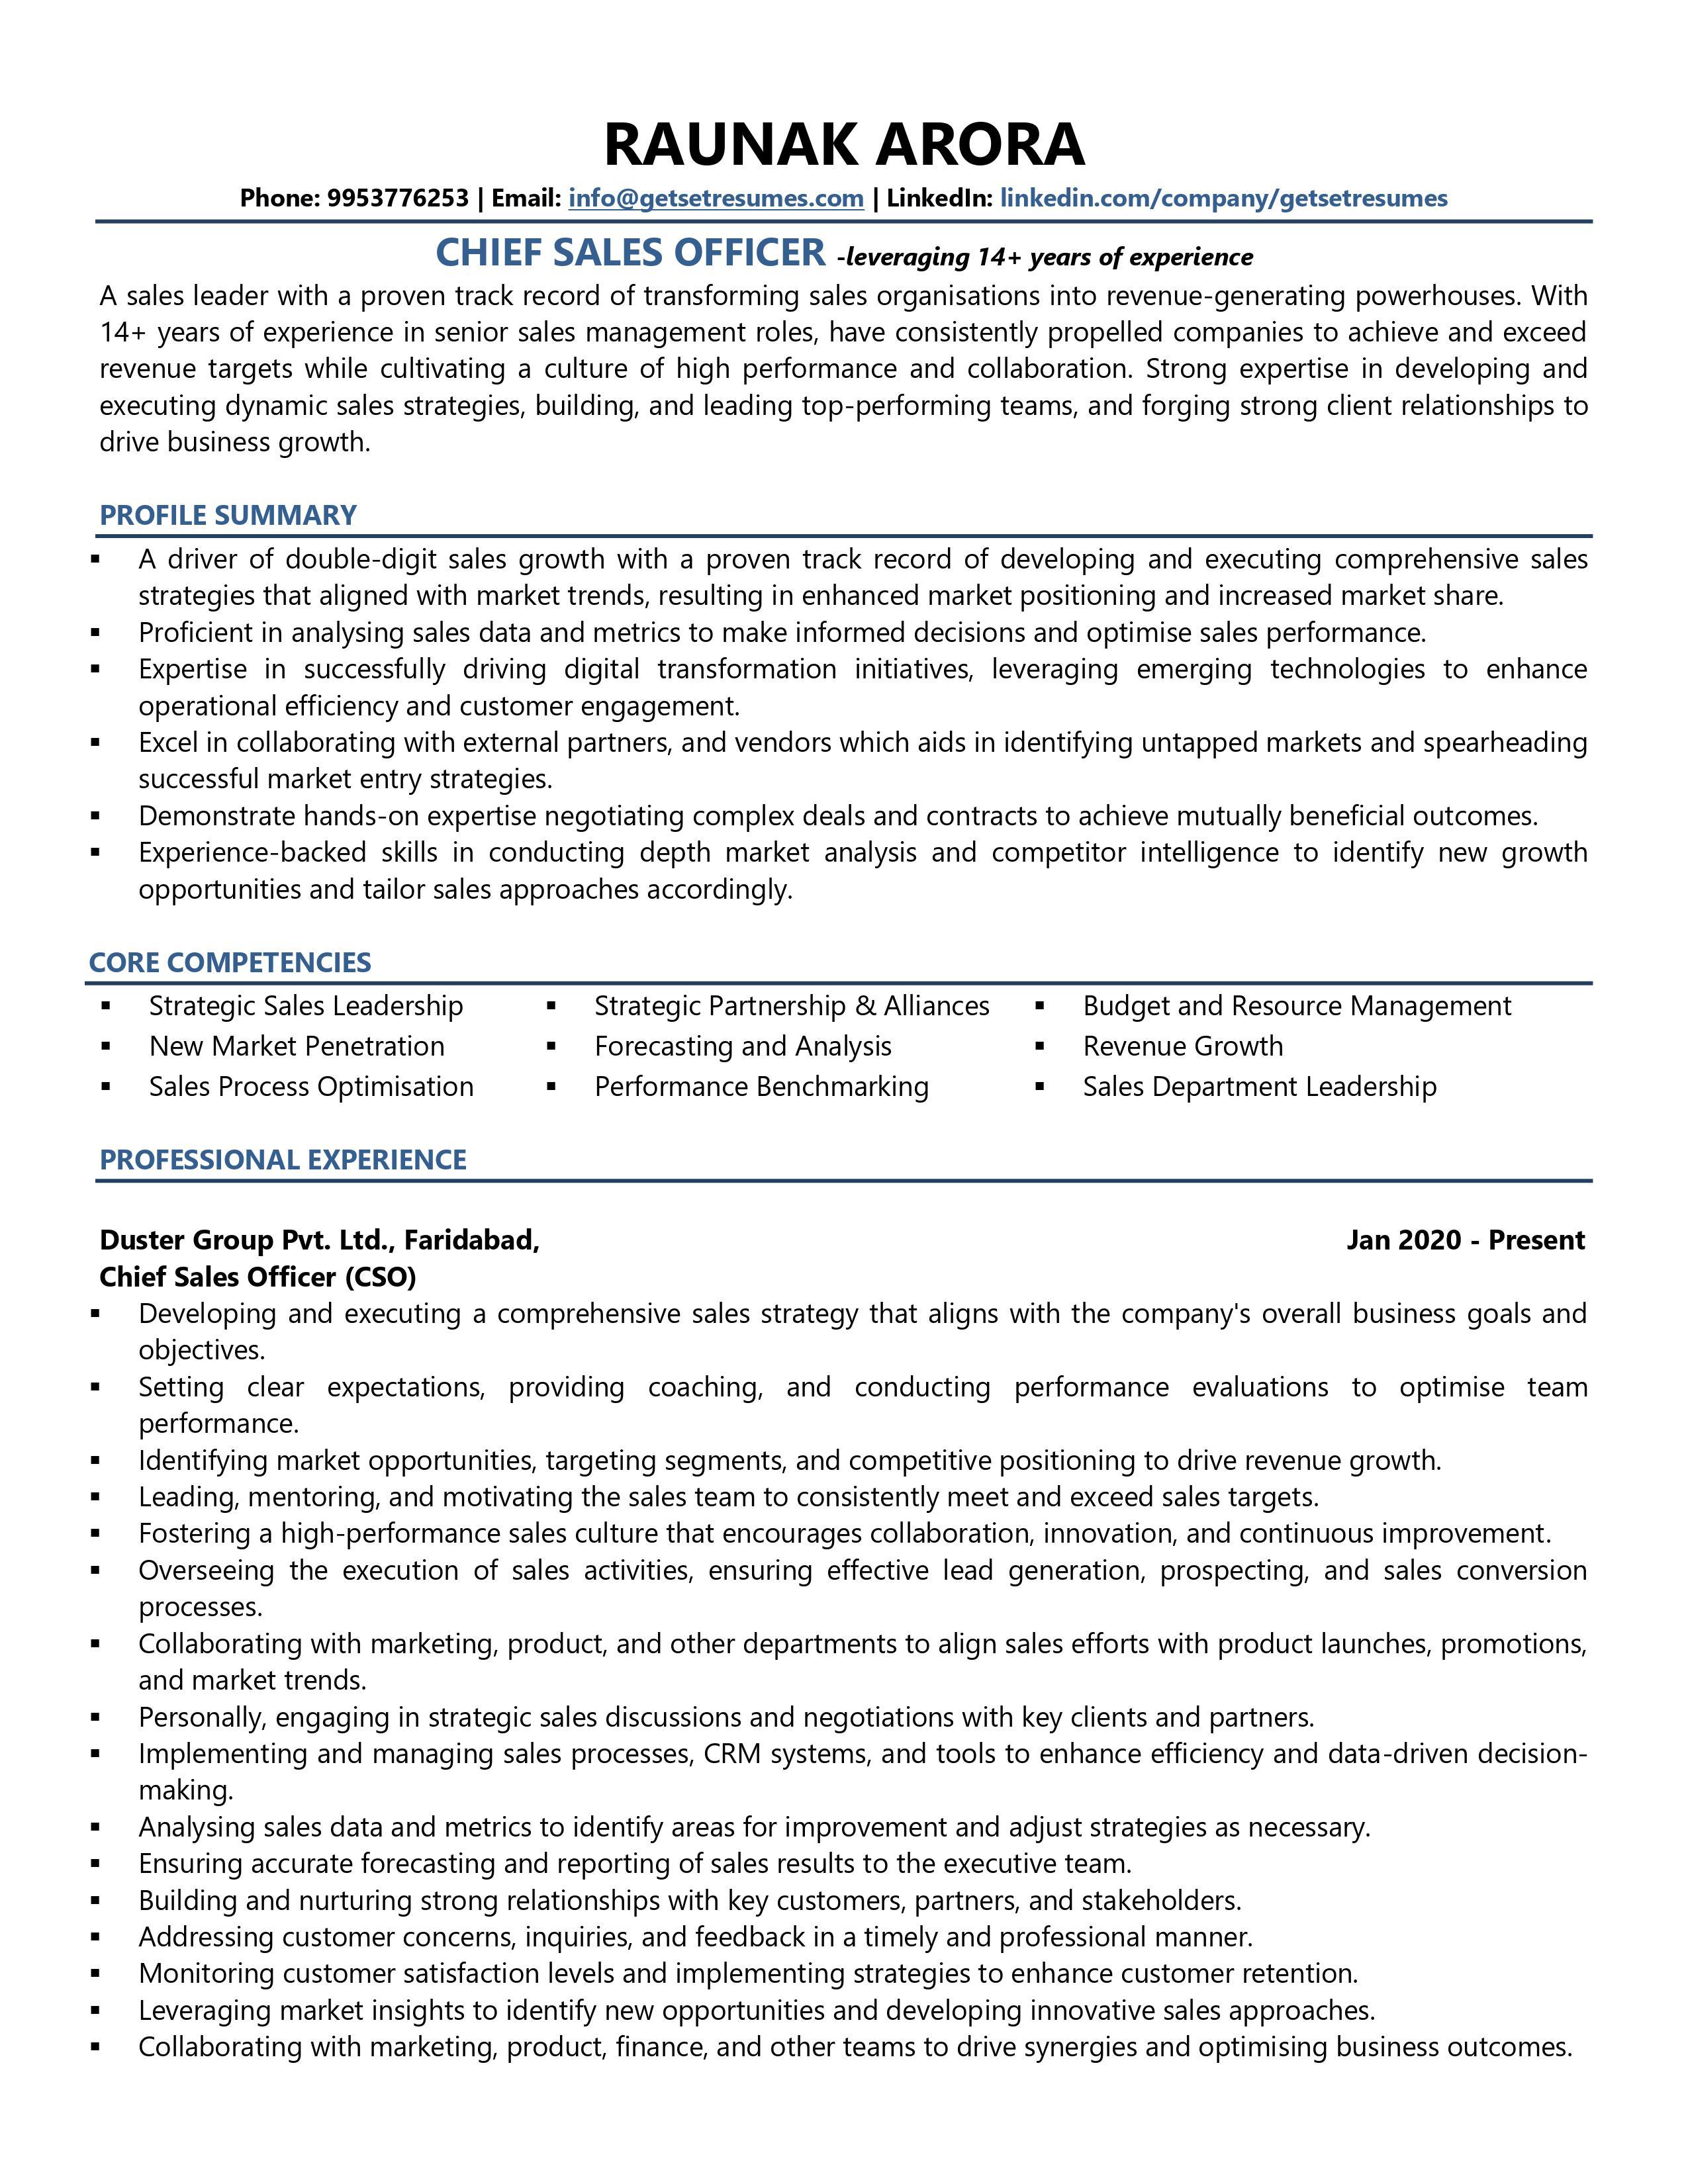 Chief Sales Officer - Resume Example & Template